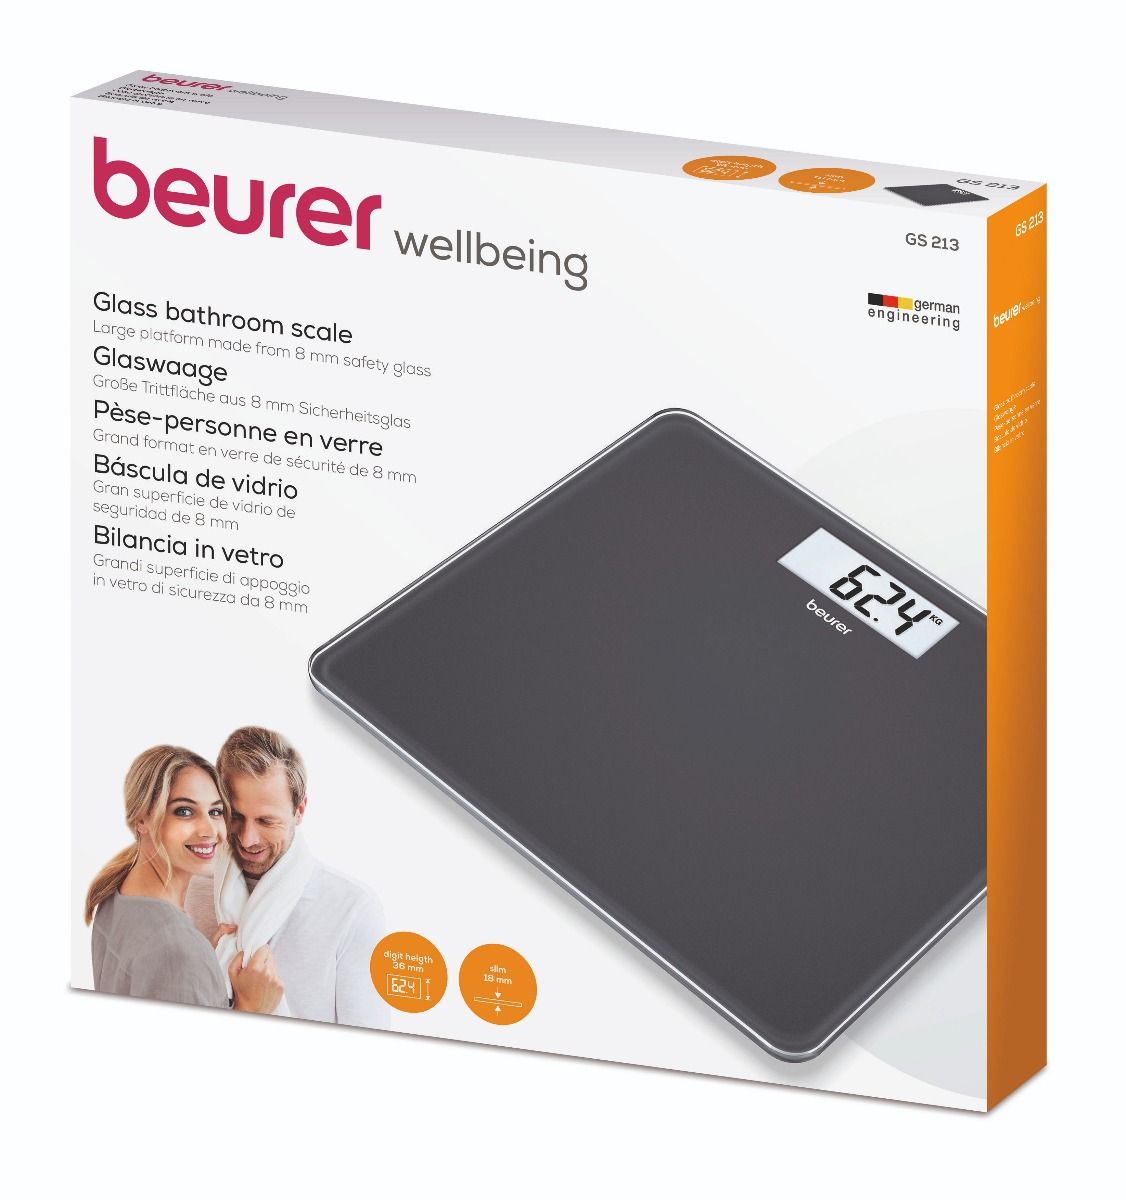 Beurer GS 213 glass bathroom weighing scale